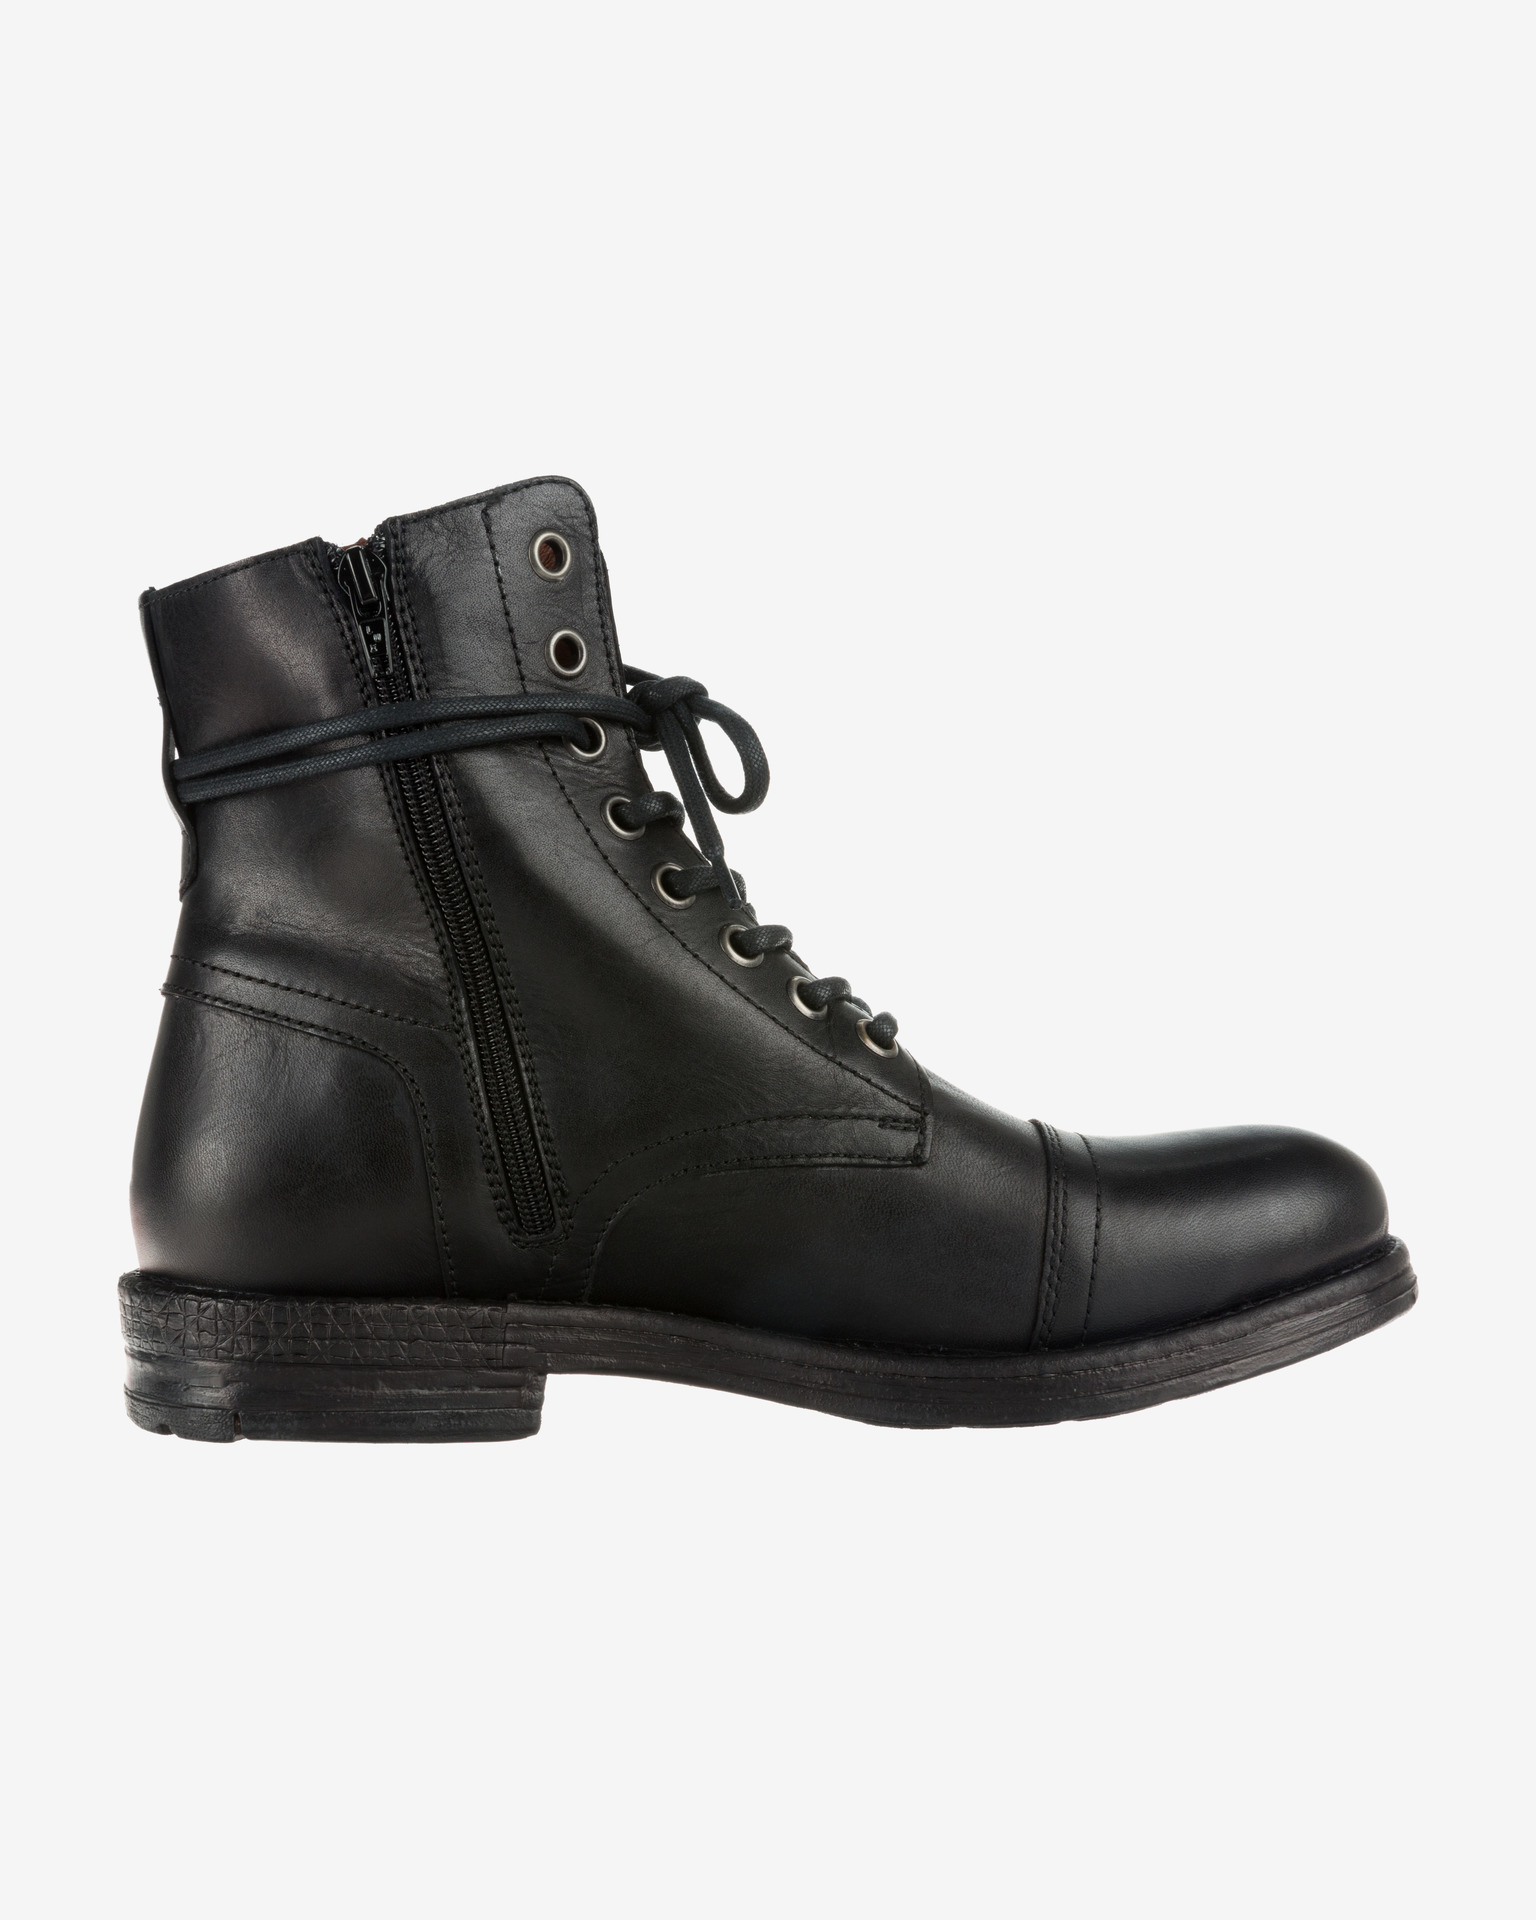 REPLAY MENS PHIM BLACK LEATHER BOOTS